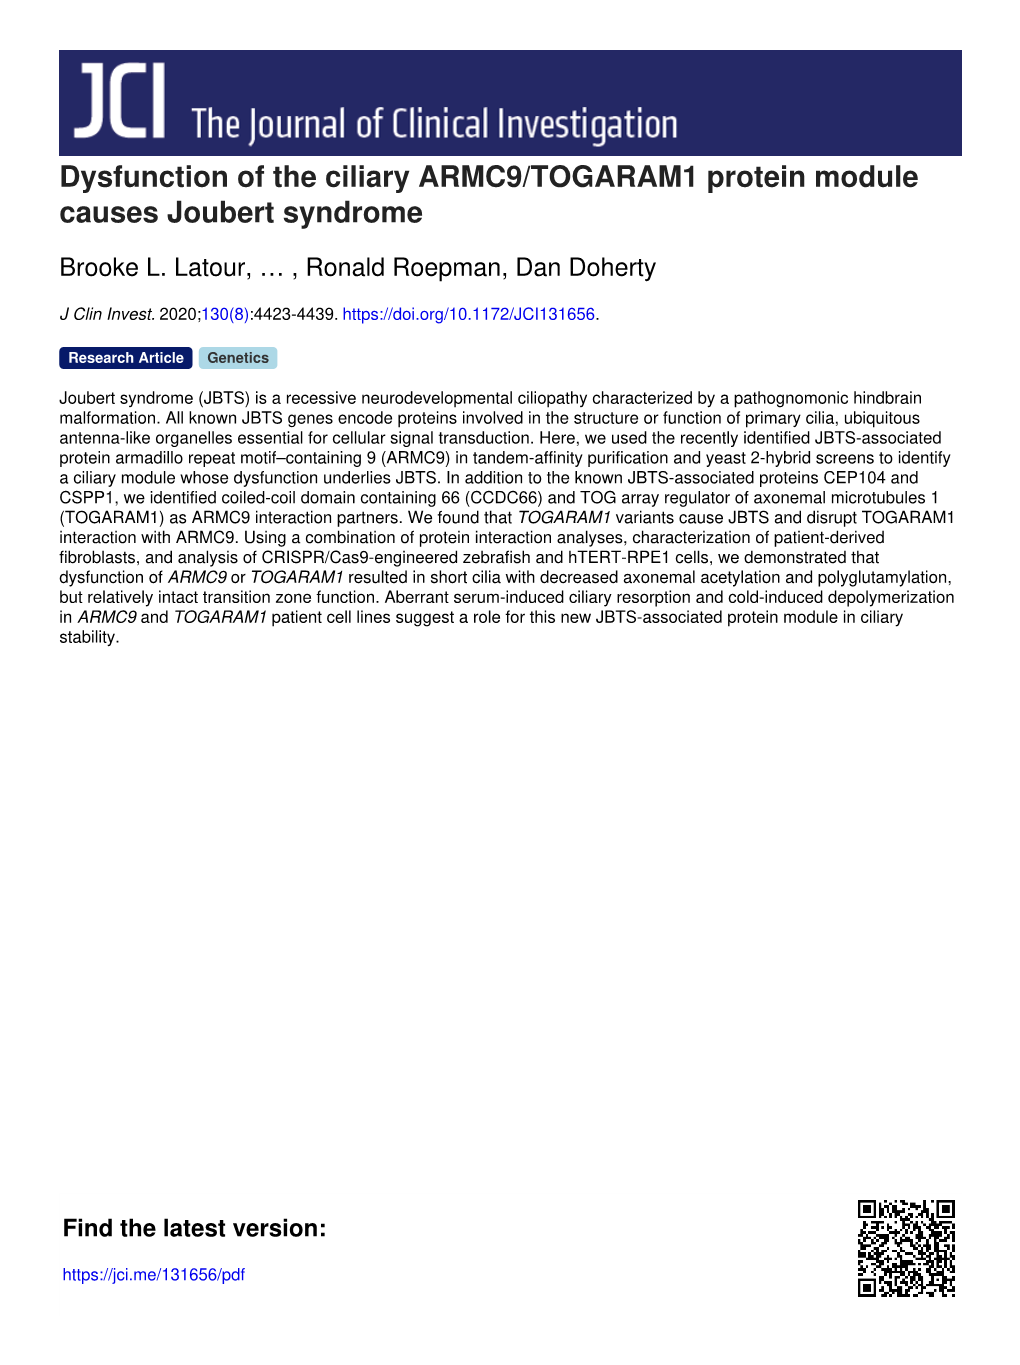 Dysfunction of the Ciliary ARMC9/TOGARAM1 Protein Module Causes Joubert Syndrome